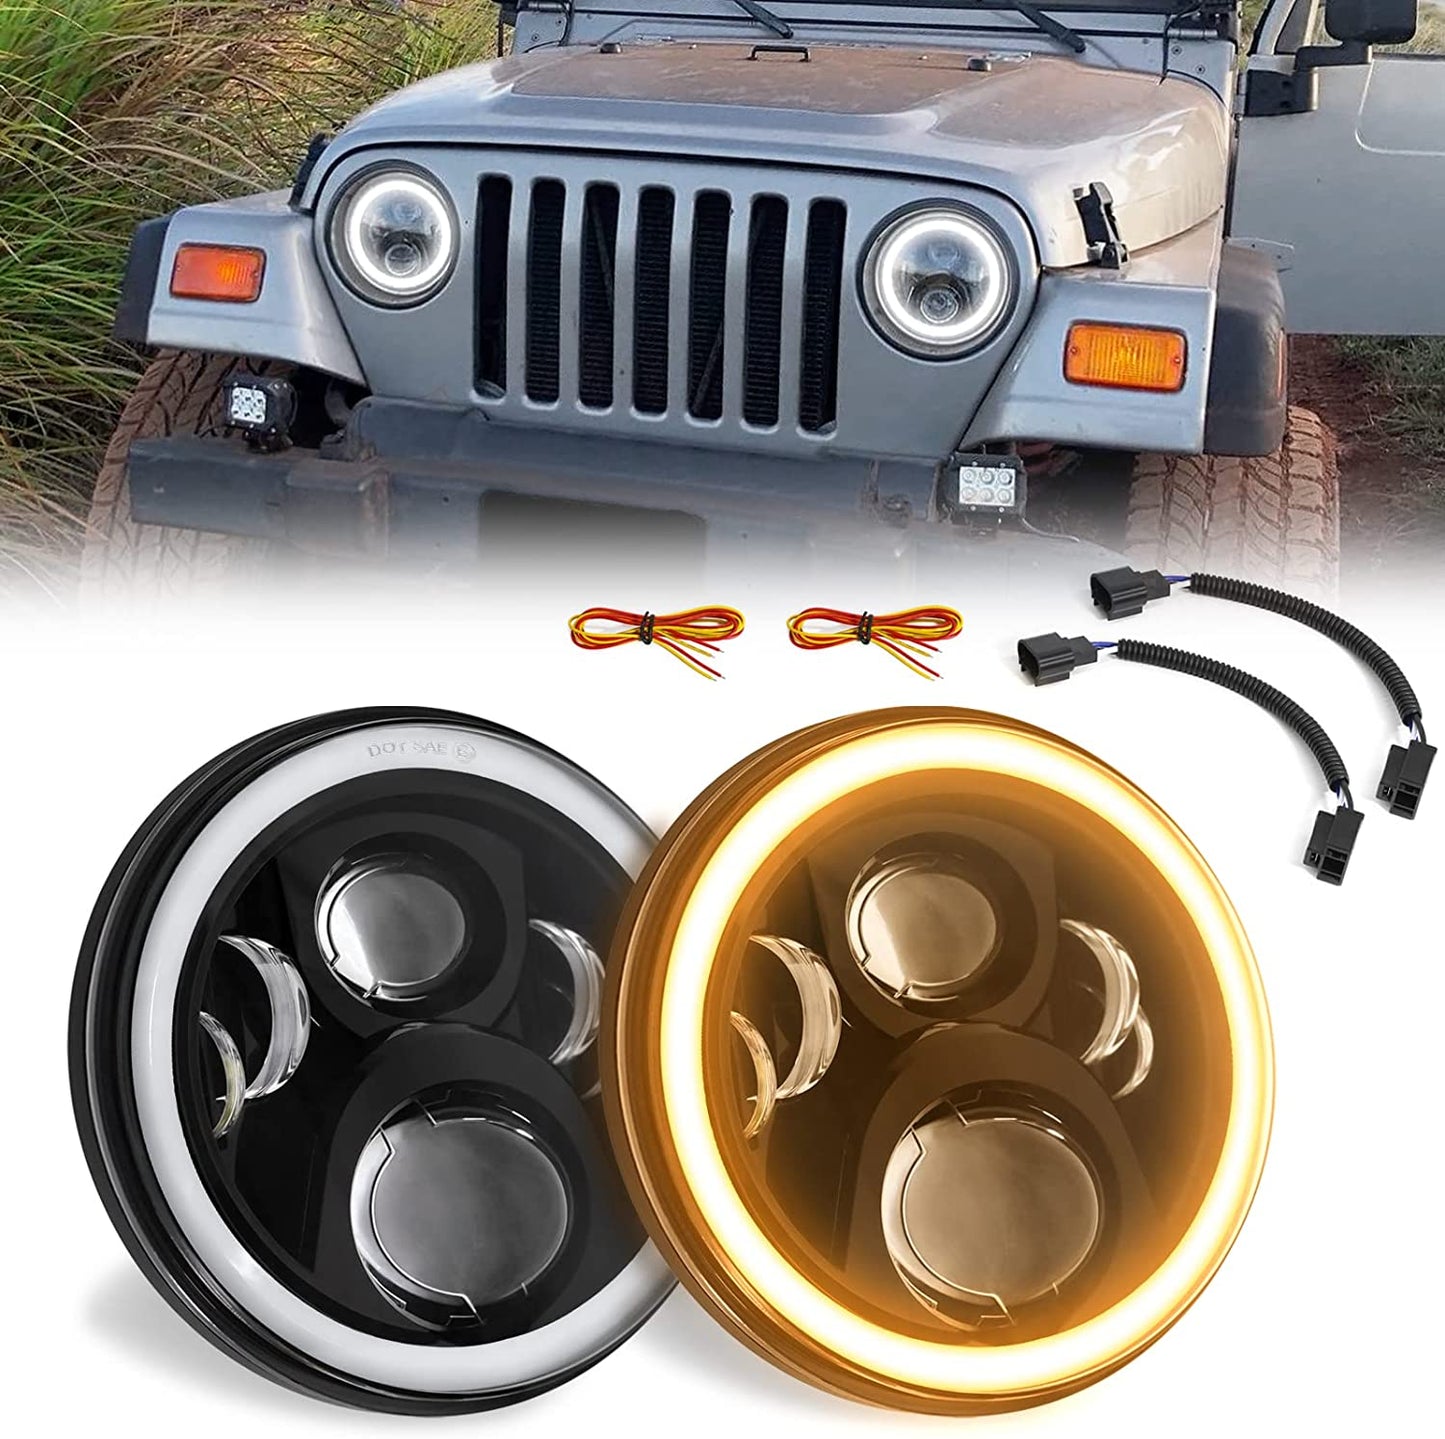 Haitzu 7 inch Led Round Black Hi/lo Sealed Beam headlight DOT Approved Compatible with Jeep Wrangler JK Hummer H1 H2 ,Halo with Amber Turn Light & DRL, H6024 Replacement,included H4-H13 Adaptor 2 Pcs